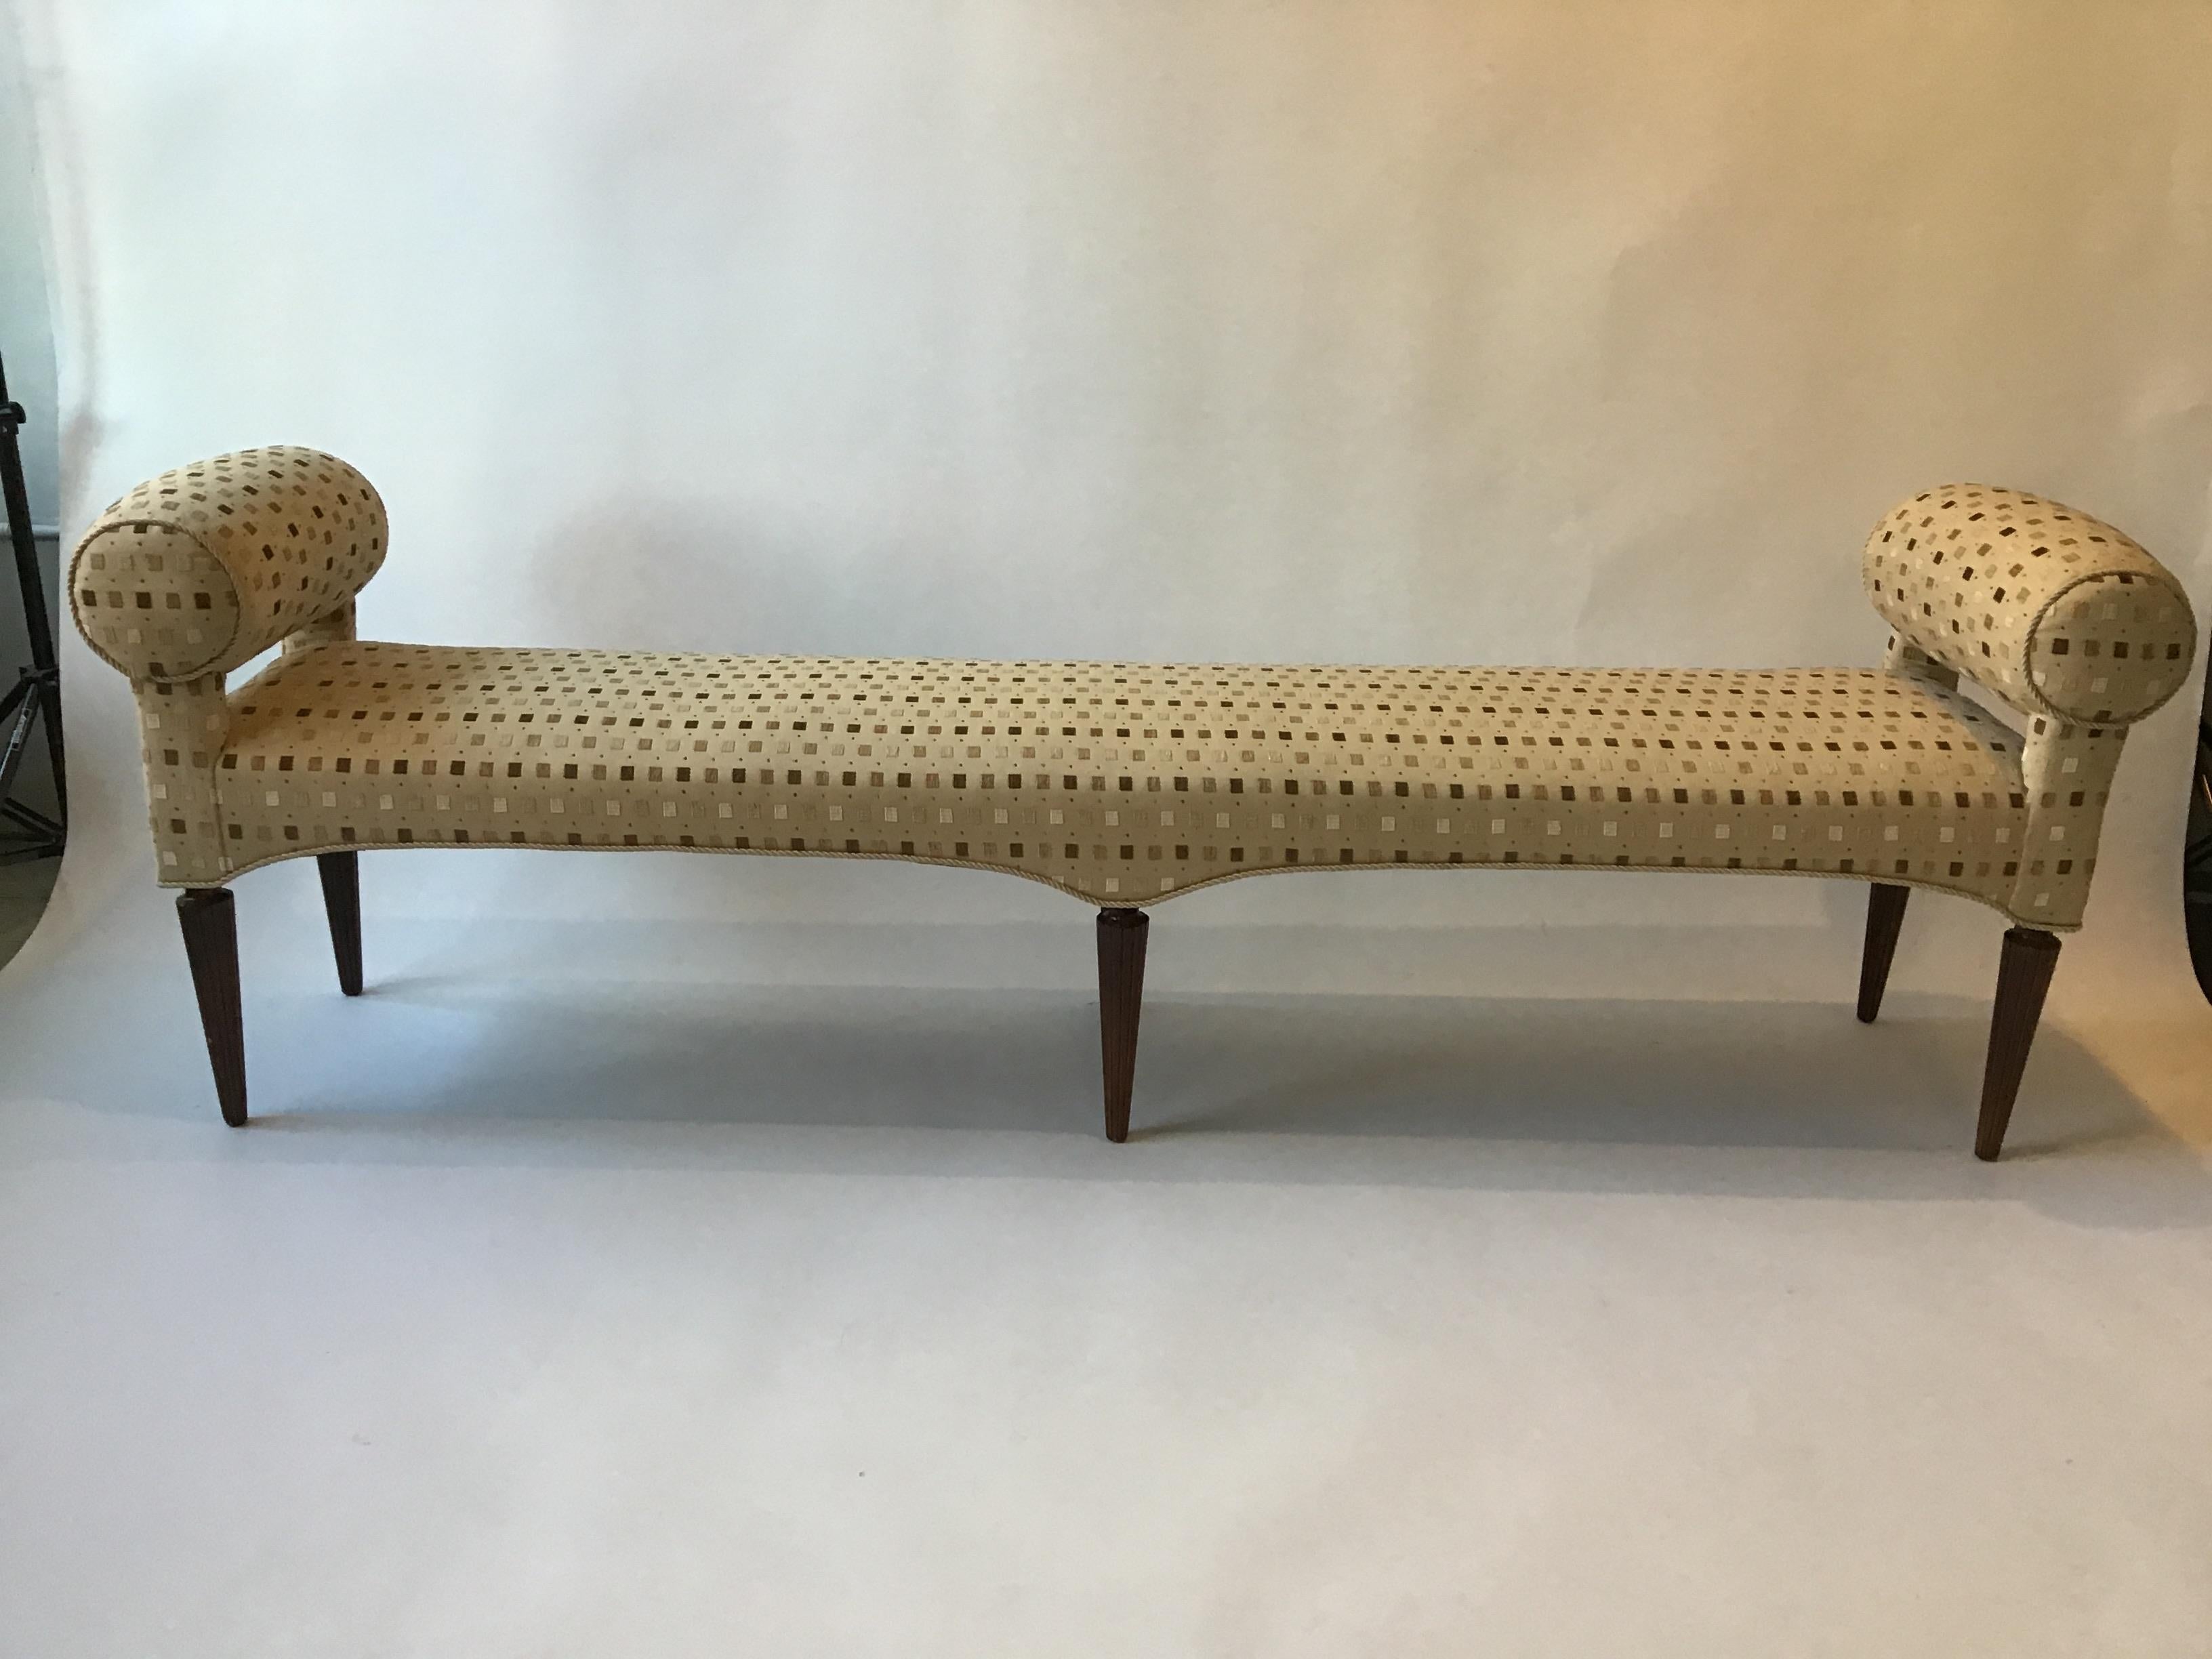 Almost 7’ long (81”), upholstered rolled arm bench.